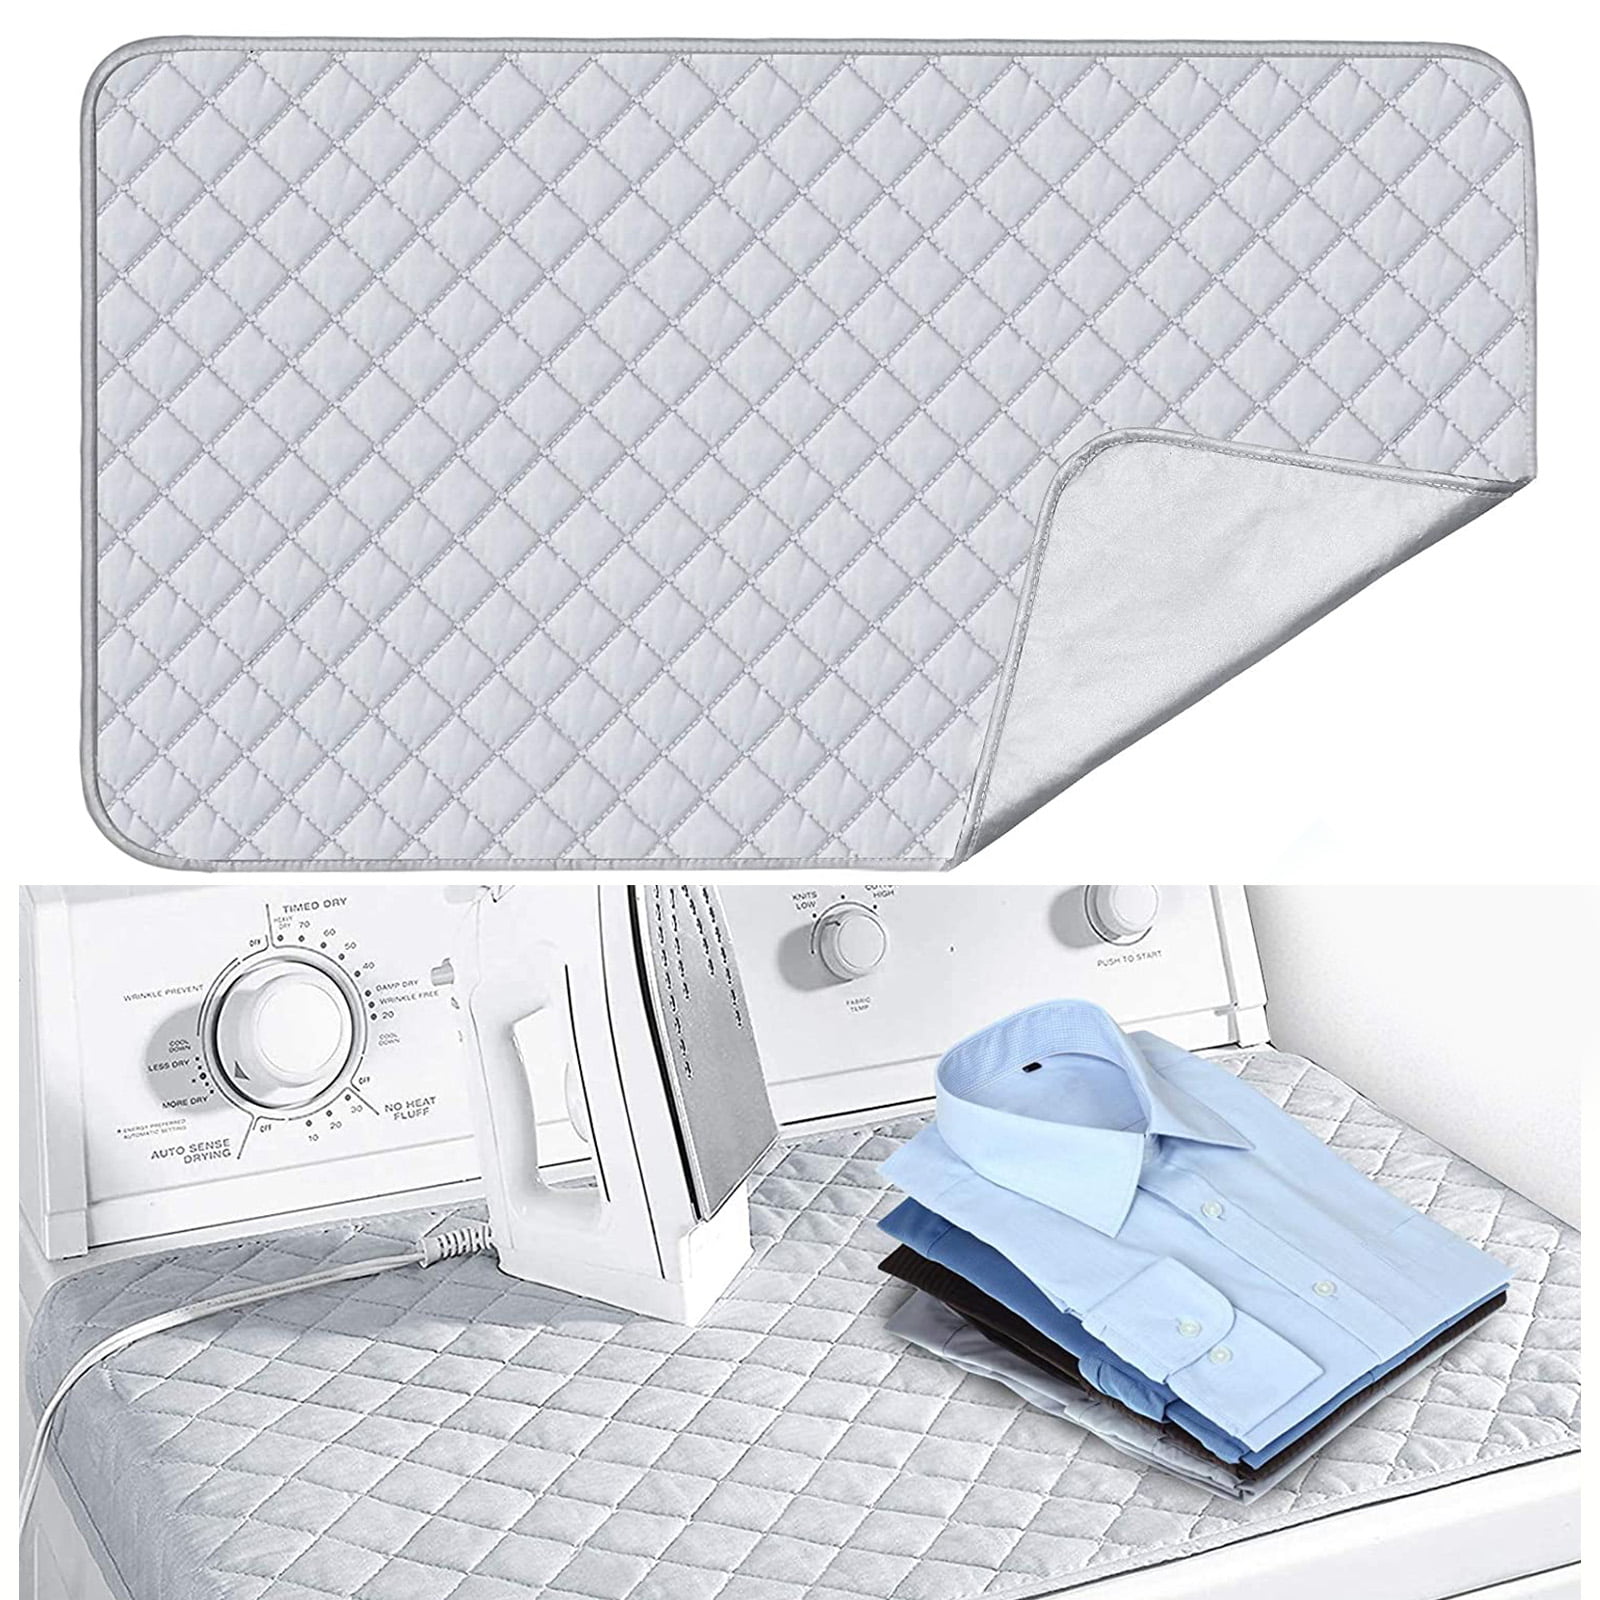 Magnetic Portable Mat Washer Ironing Cover Dryer Board Resistant Heat F6G1 